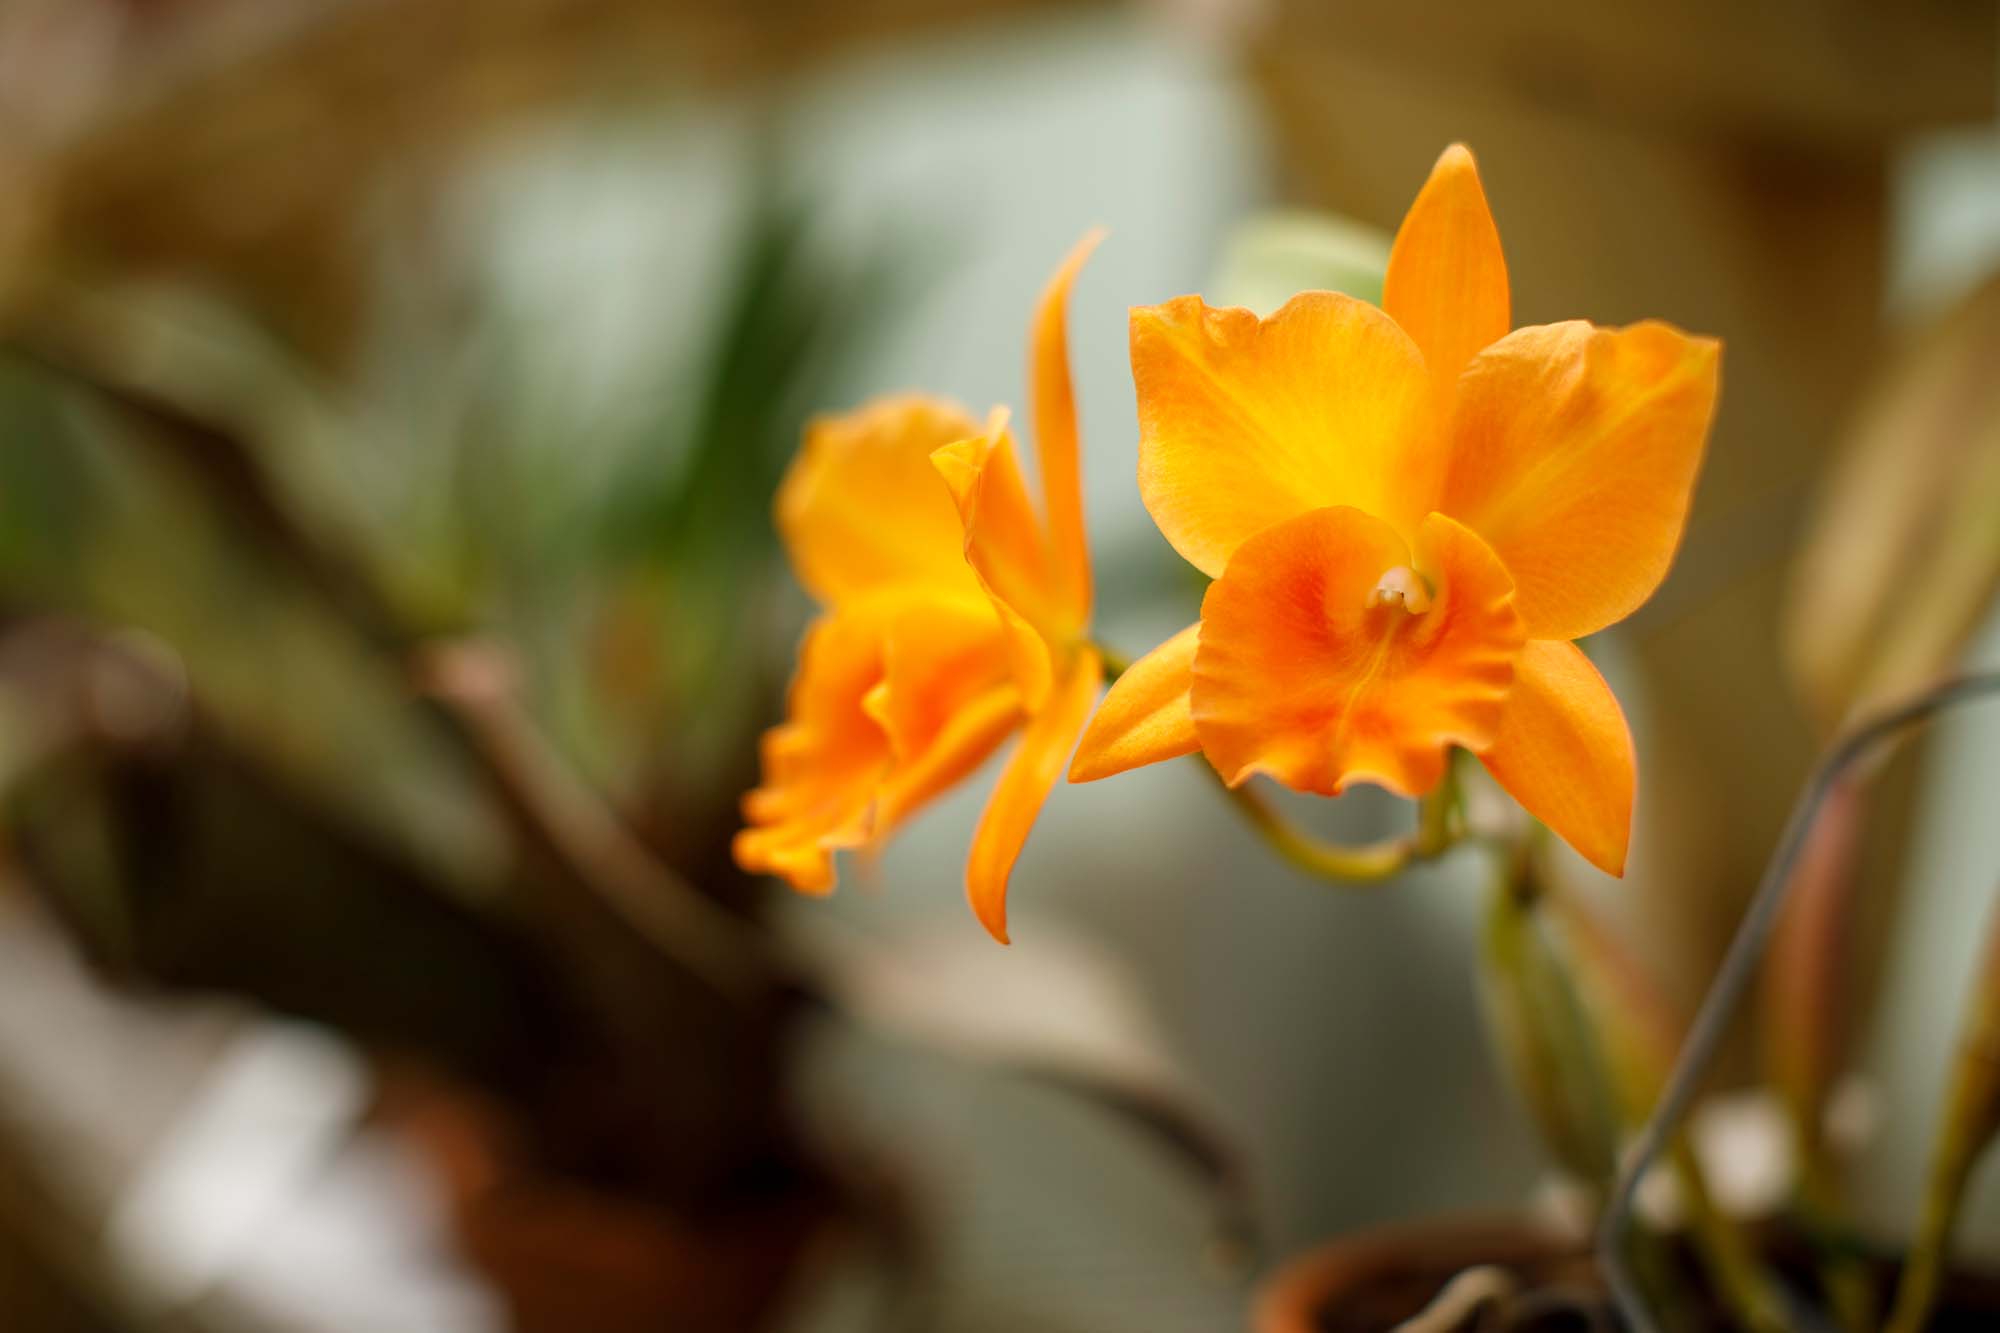 The Shell Point Orchid House, located on The Island, features more than 1,000 orchids cared for by resident gardeners.